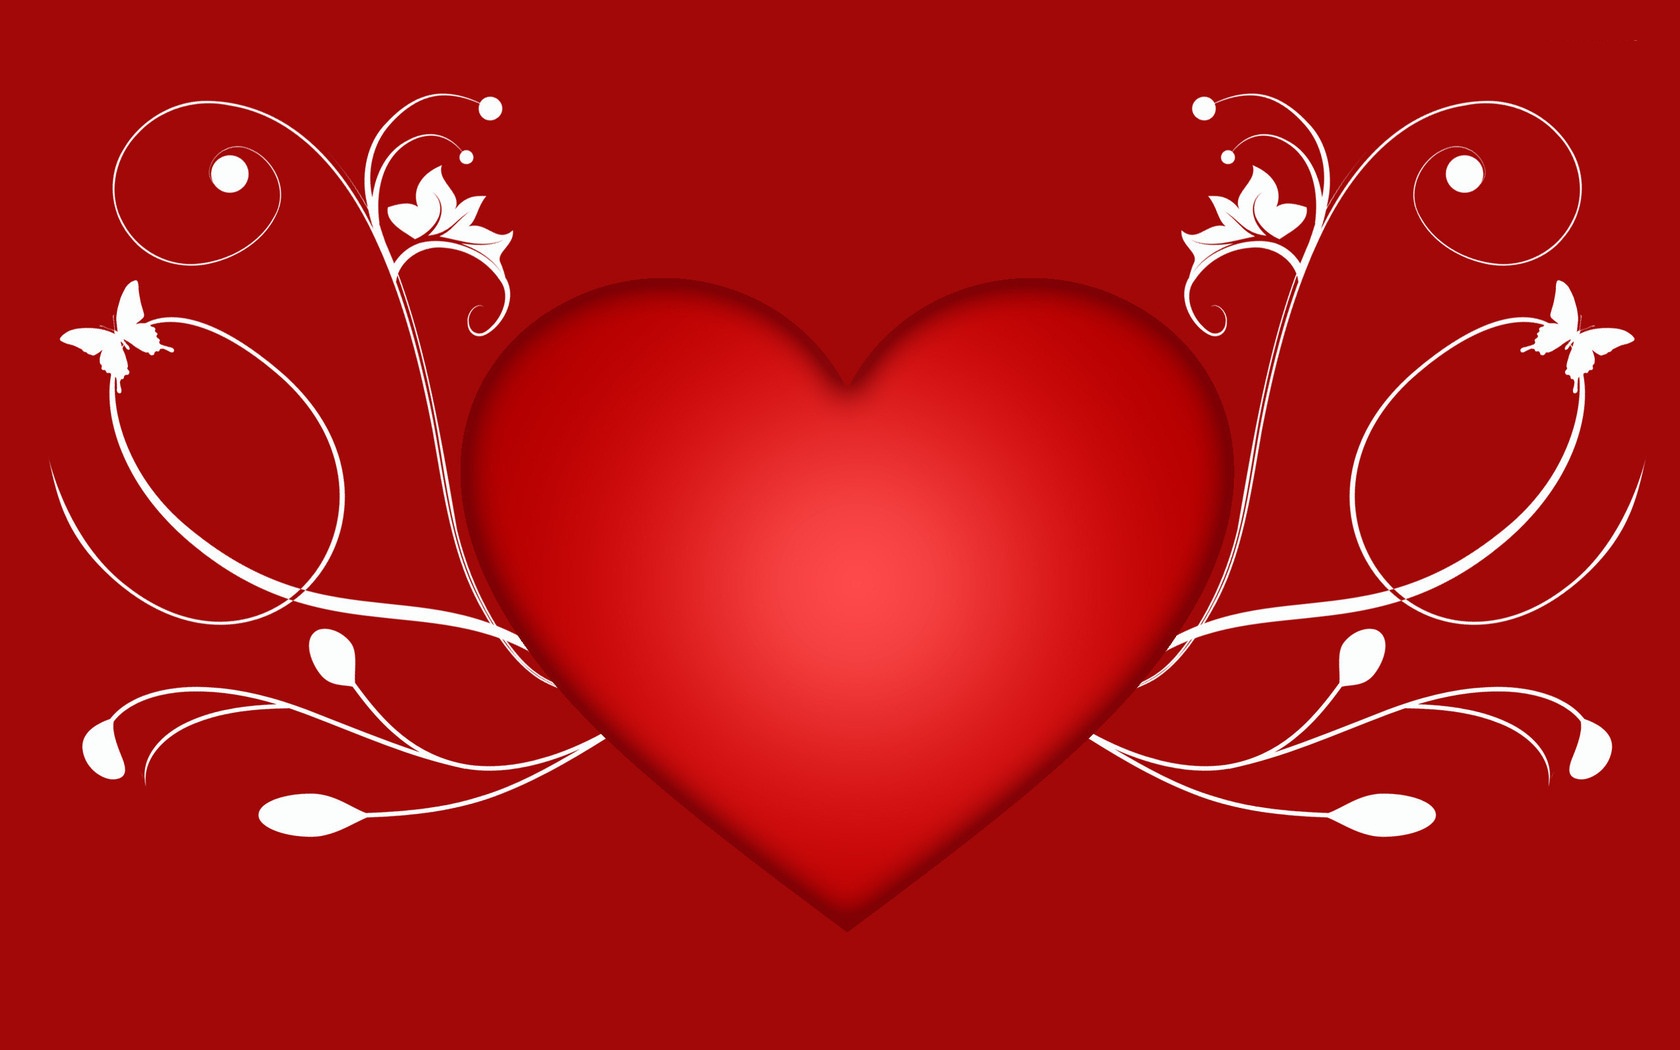 red heart design valentines day wallpapers